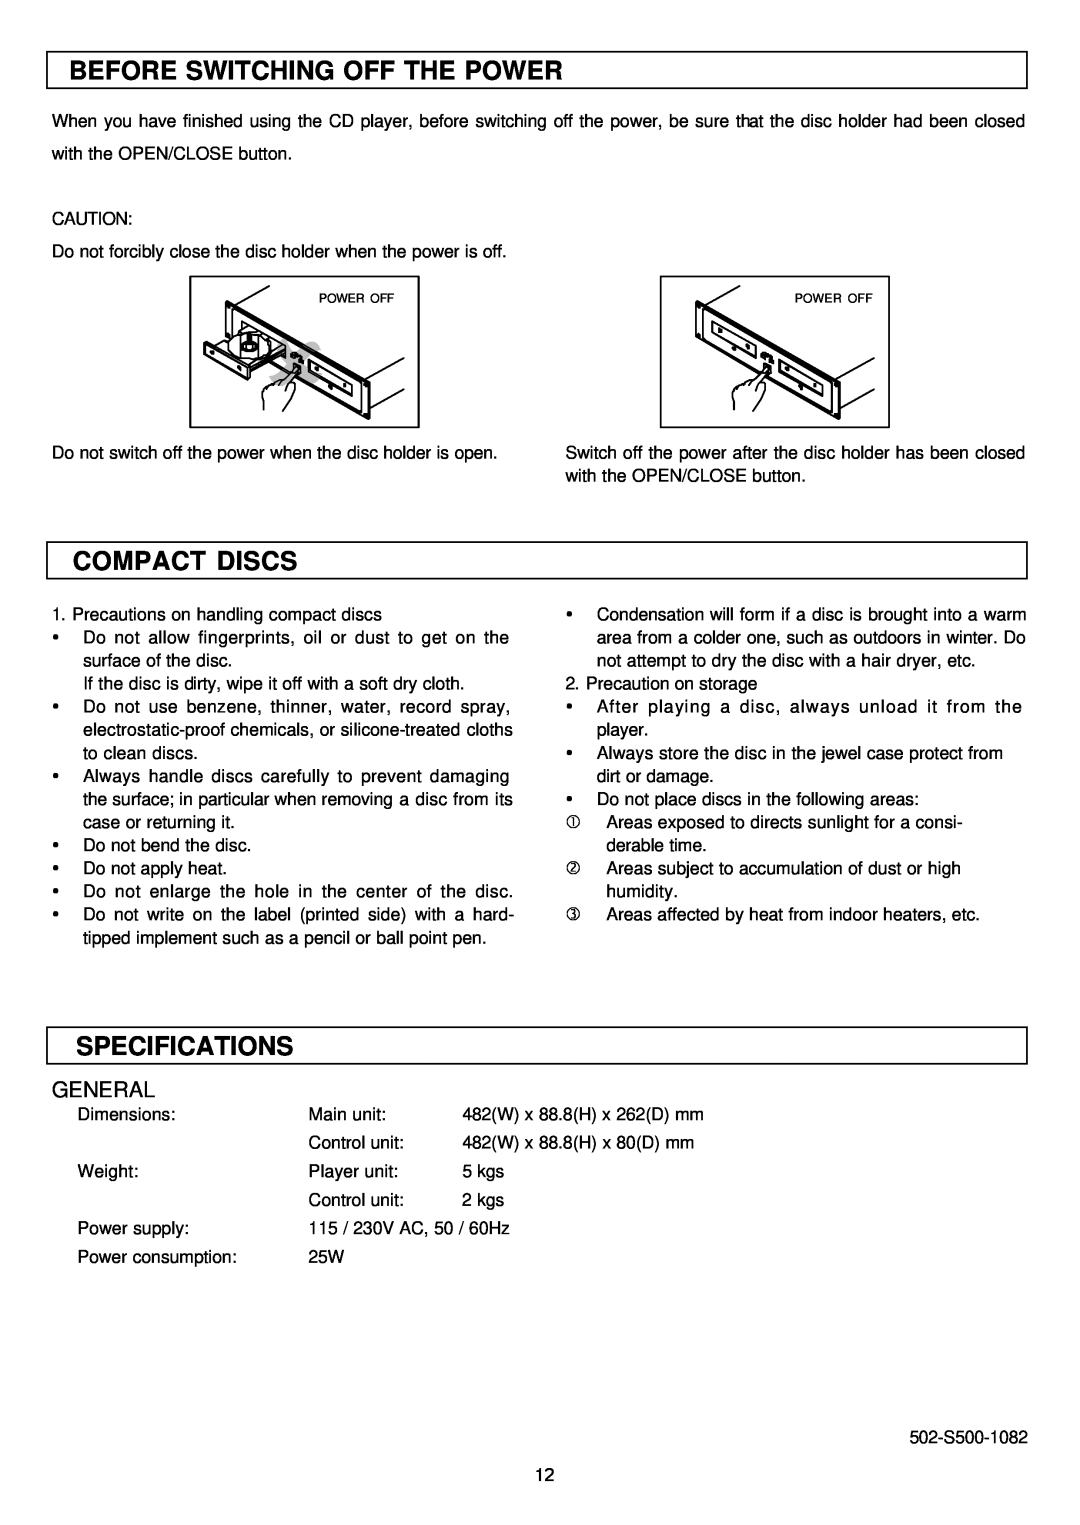 Stanton S-500 user manual Before Switching Off The Power, Compact Discs, Specifications, General 